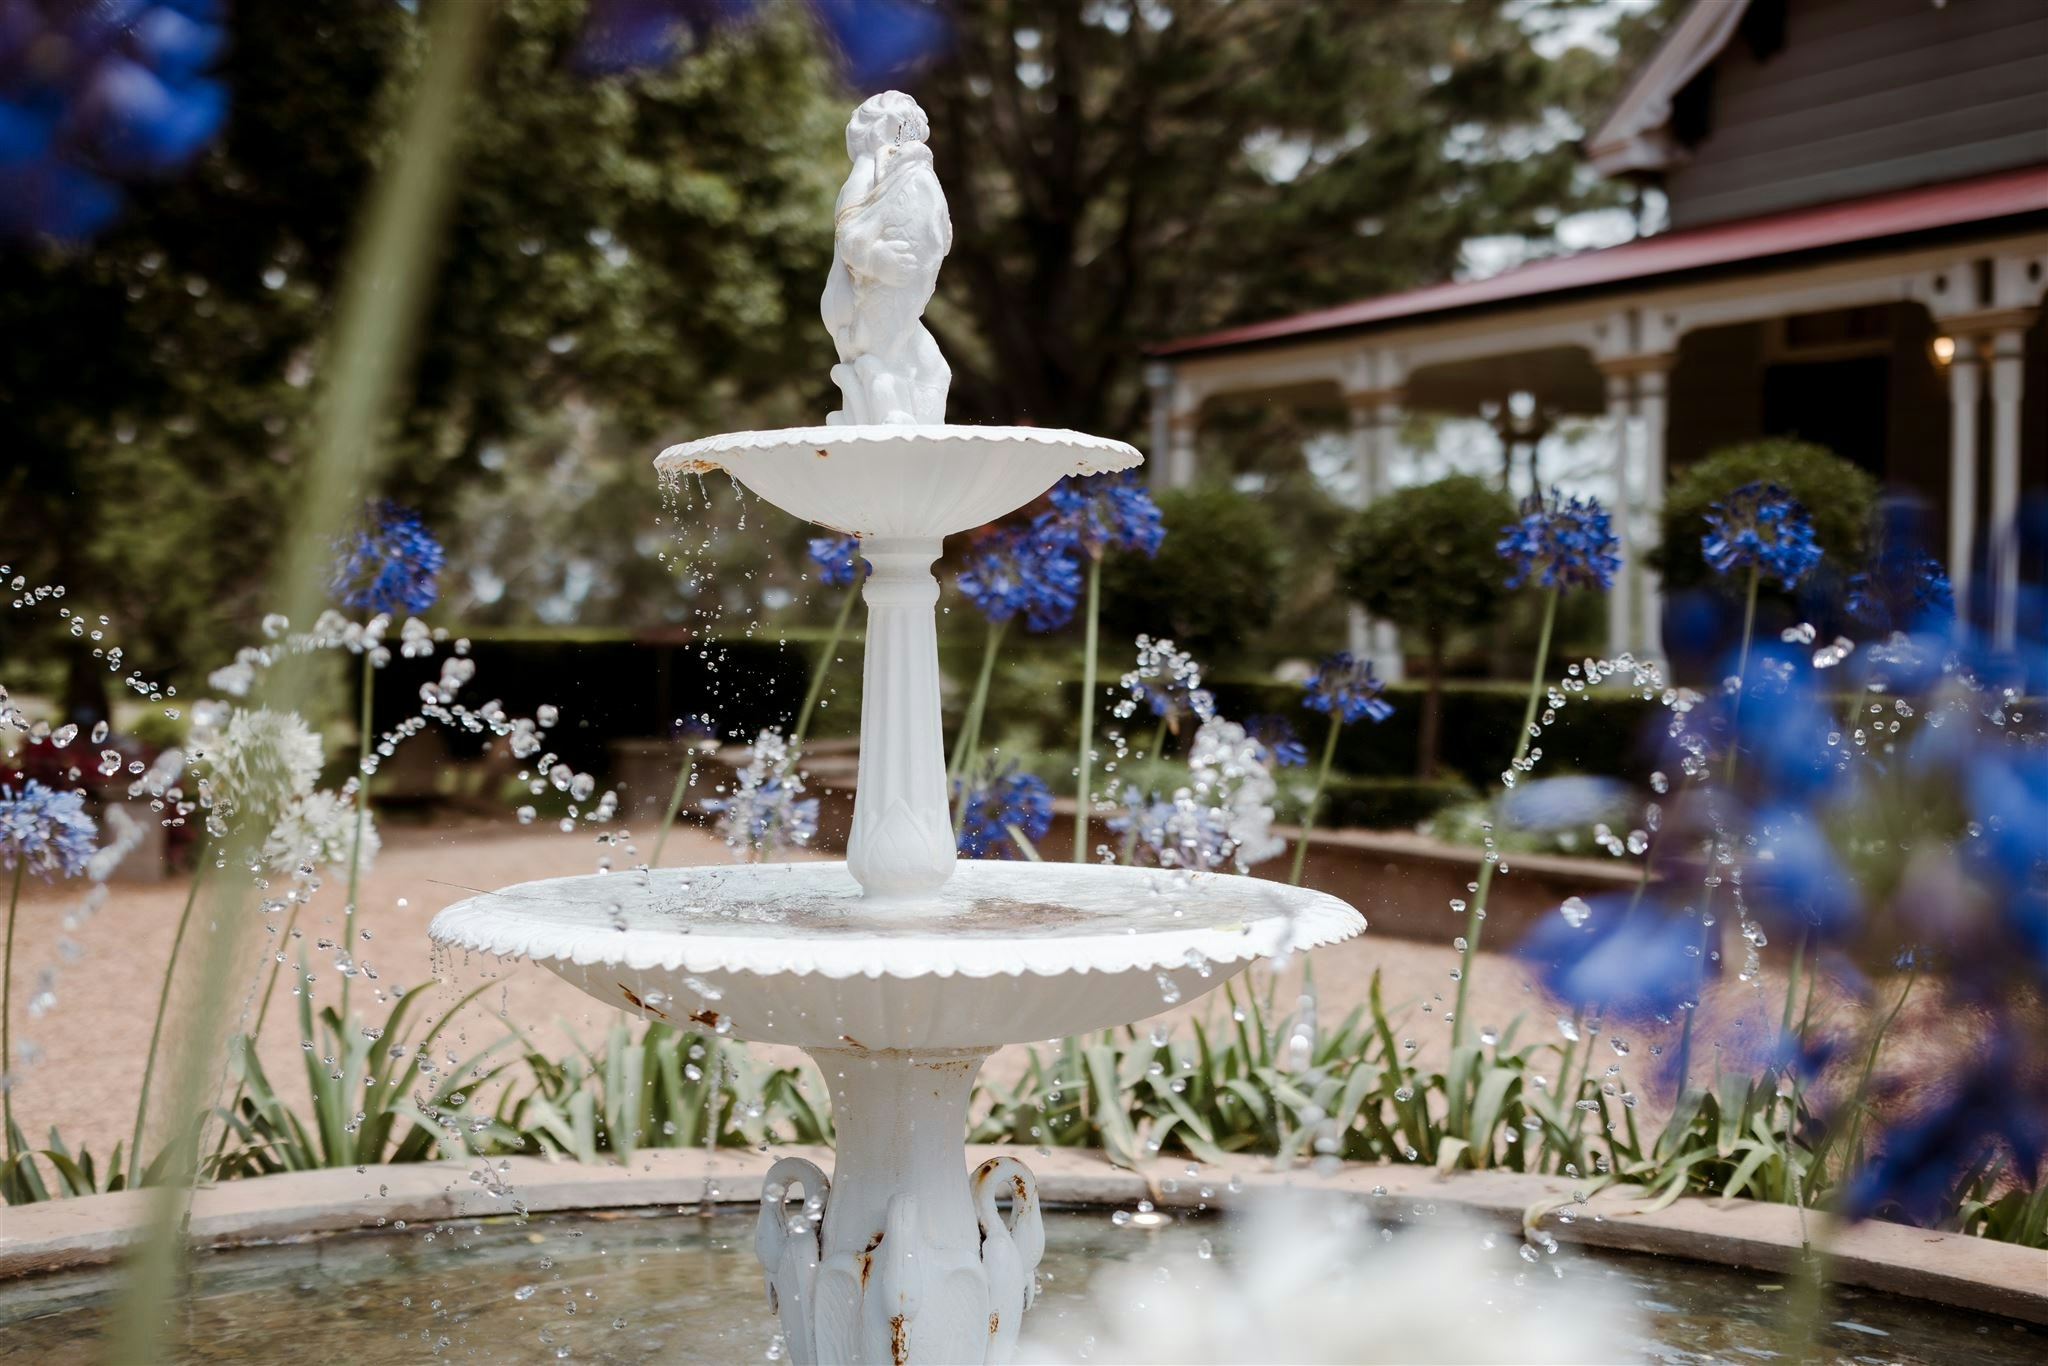 Fountain with agapanthus in bloom